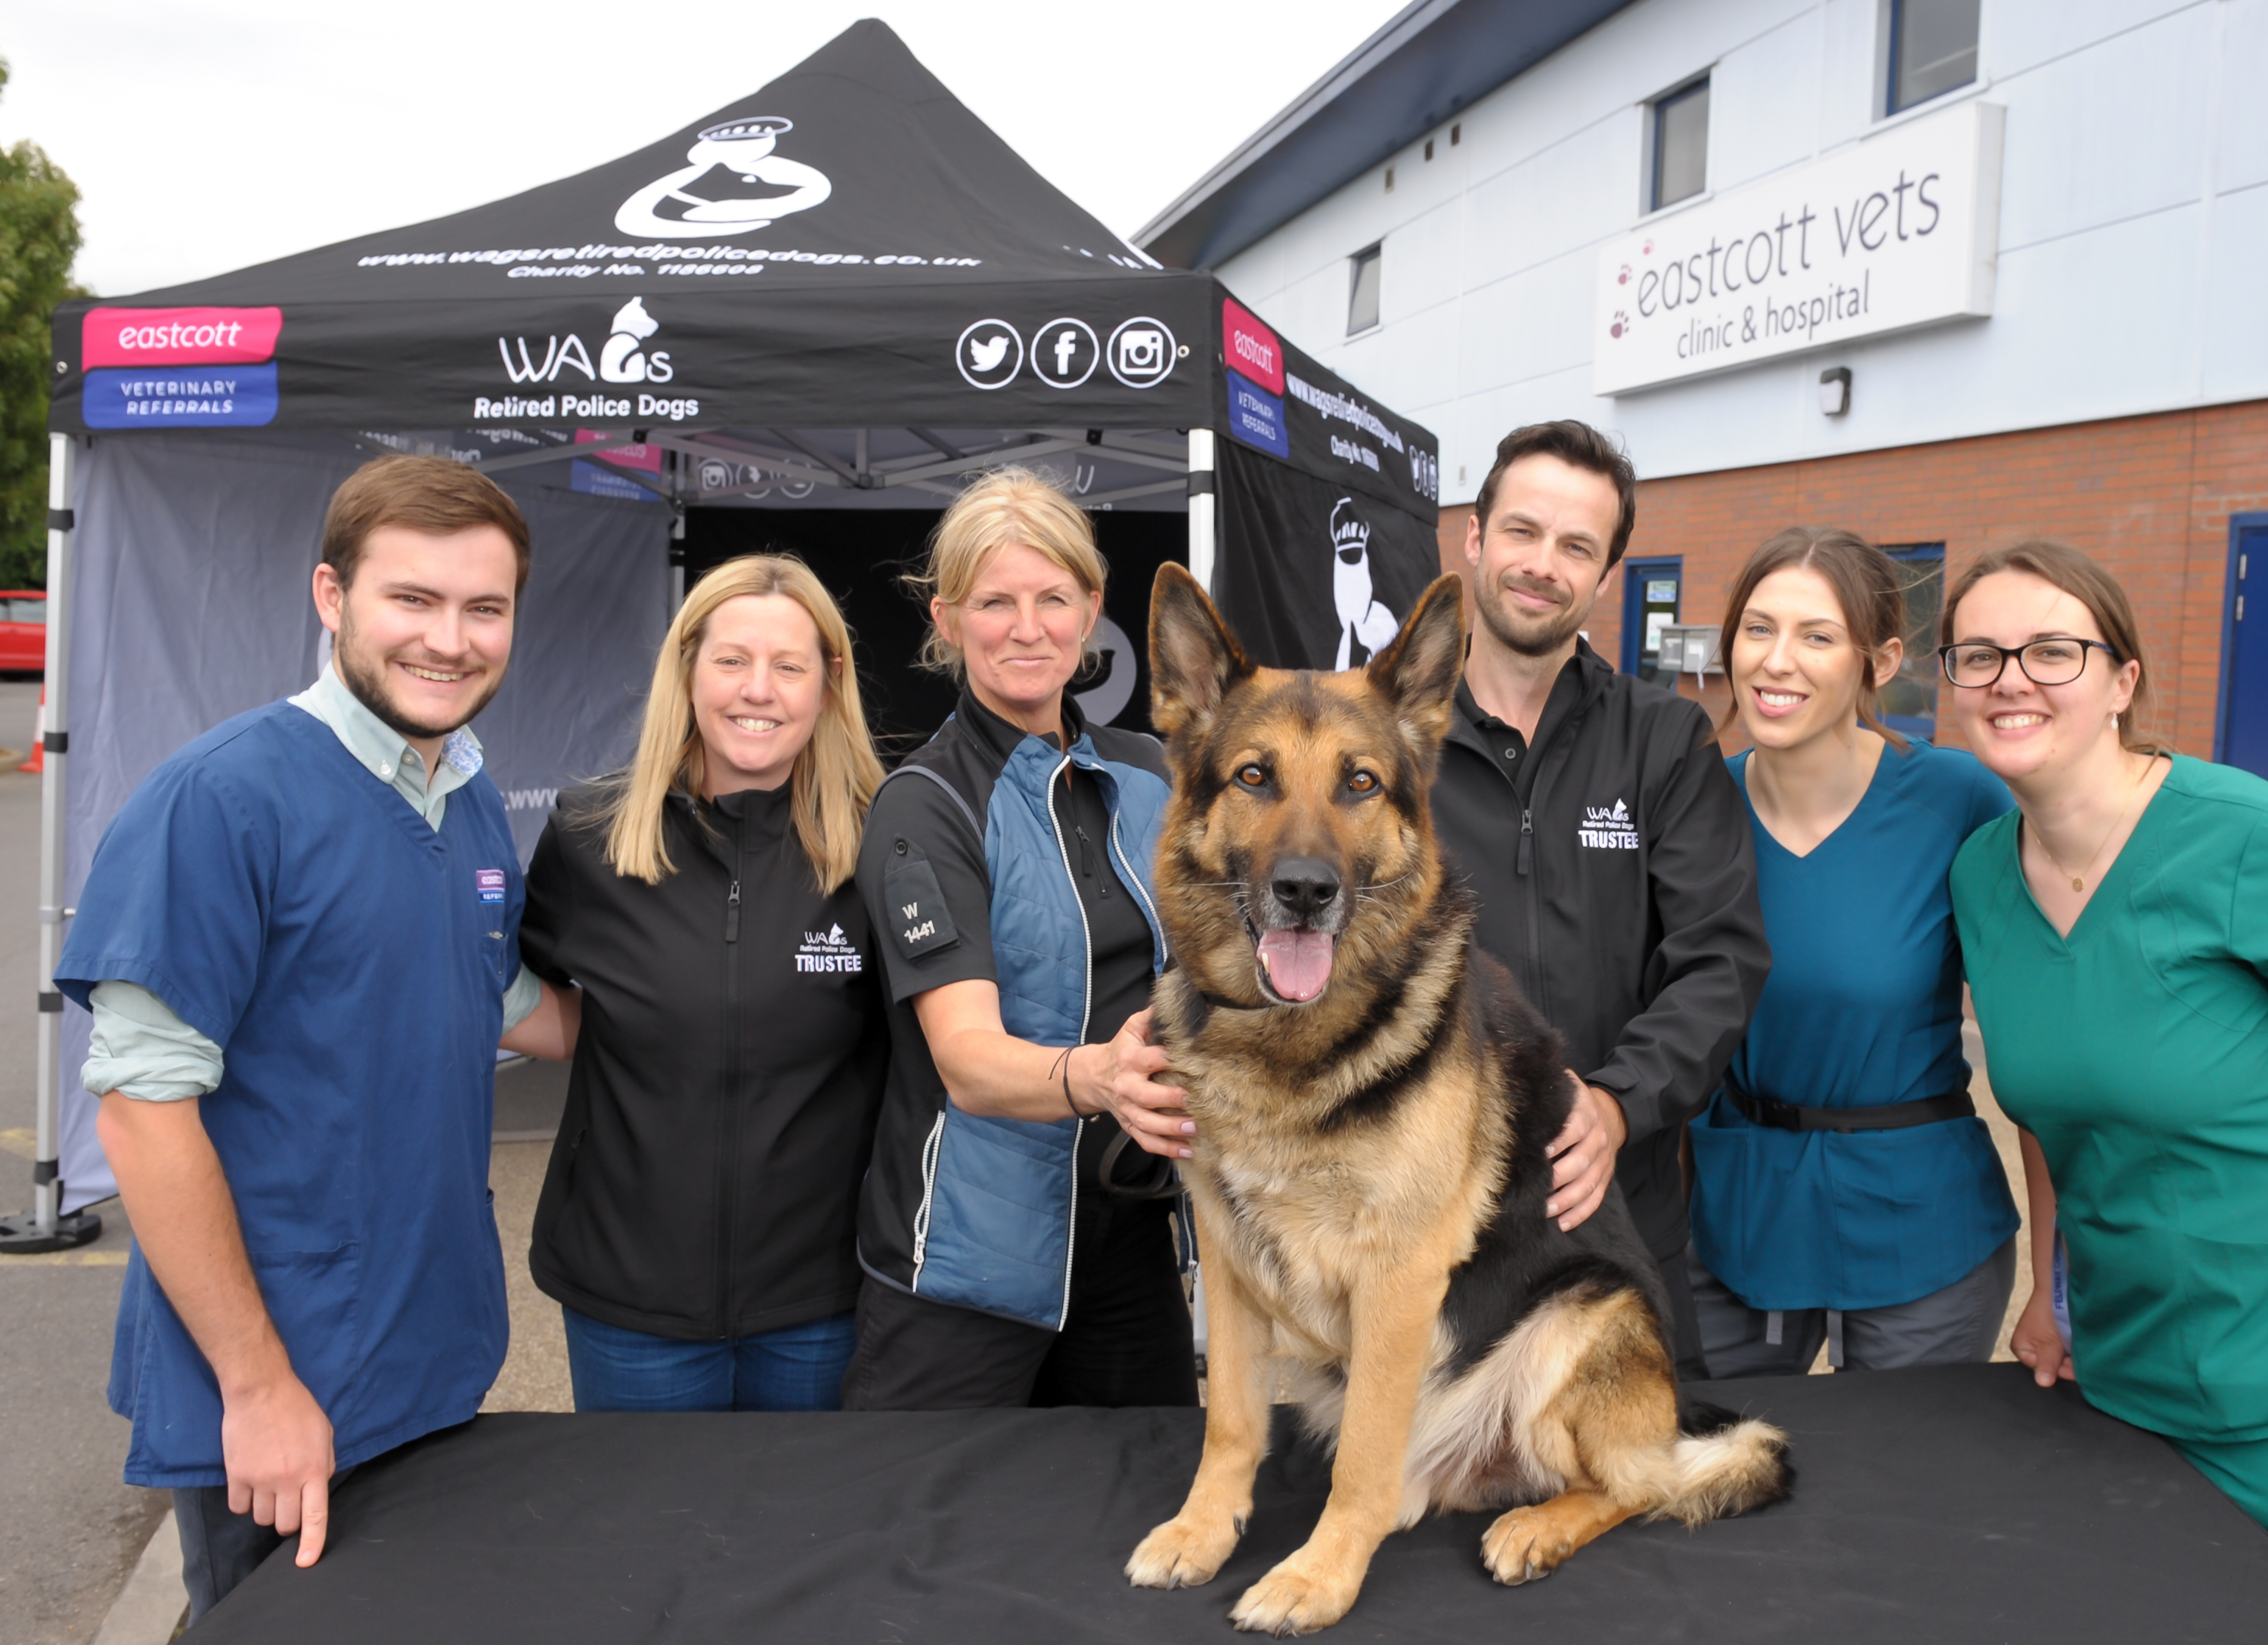 ANIMAL HOSPITAL DONATES FUNDS TO HELP RETIRED POLICE DOGS CHARITY